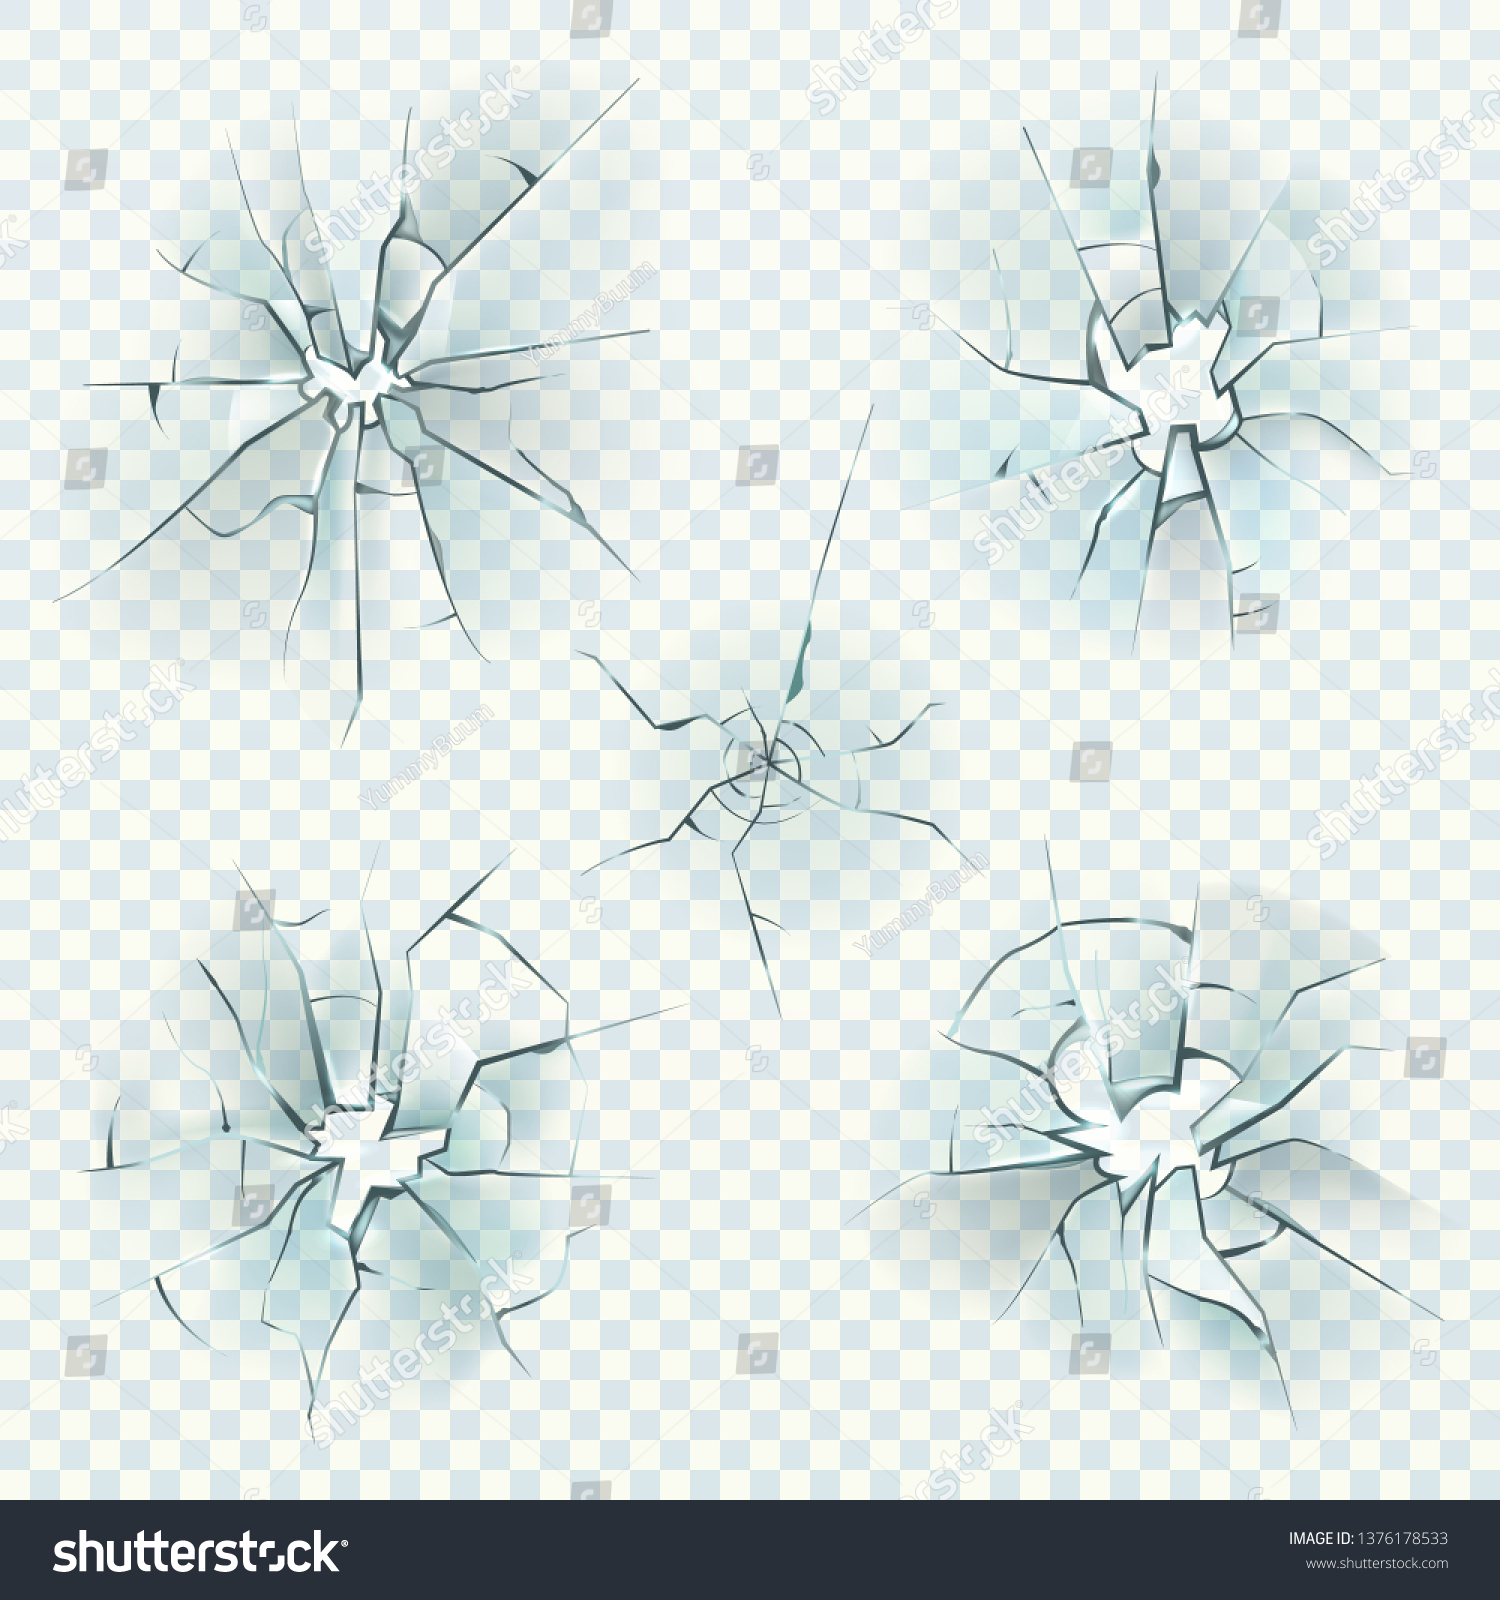 SVG of Broken glass. Realistic cracked crushed deforming mirrors crash ice, shattered screen window, bullet glass hole, damaged windshield. Vector texture set svg